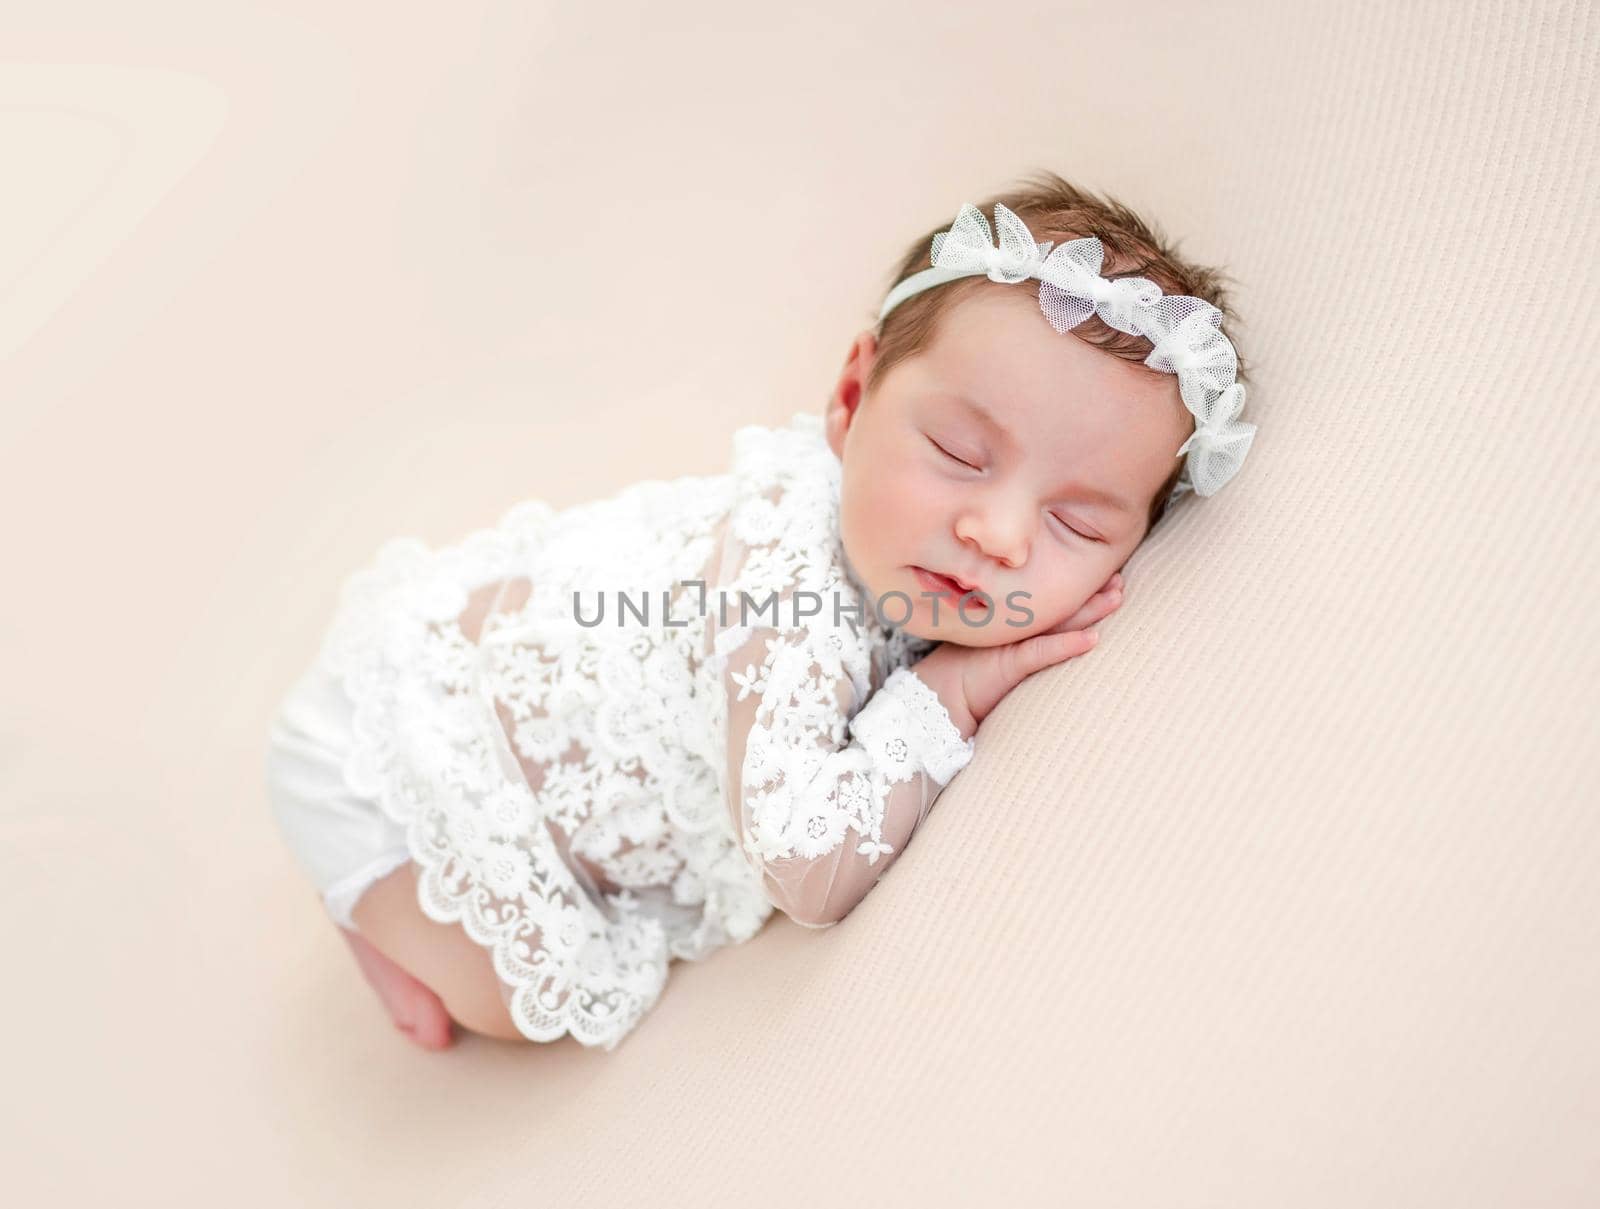 Adorable newborn baby girl wearing beautiful white costume and wreath lying on her tummy and sleeping in studio. Cute infant child napping holding hands under cheeks